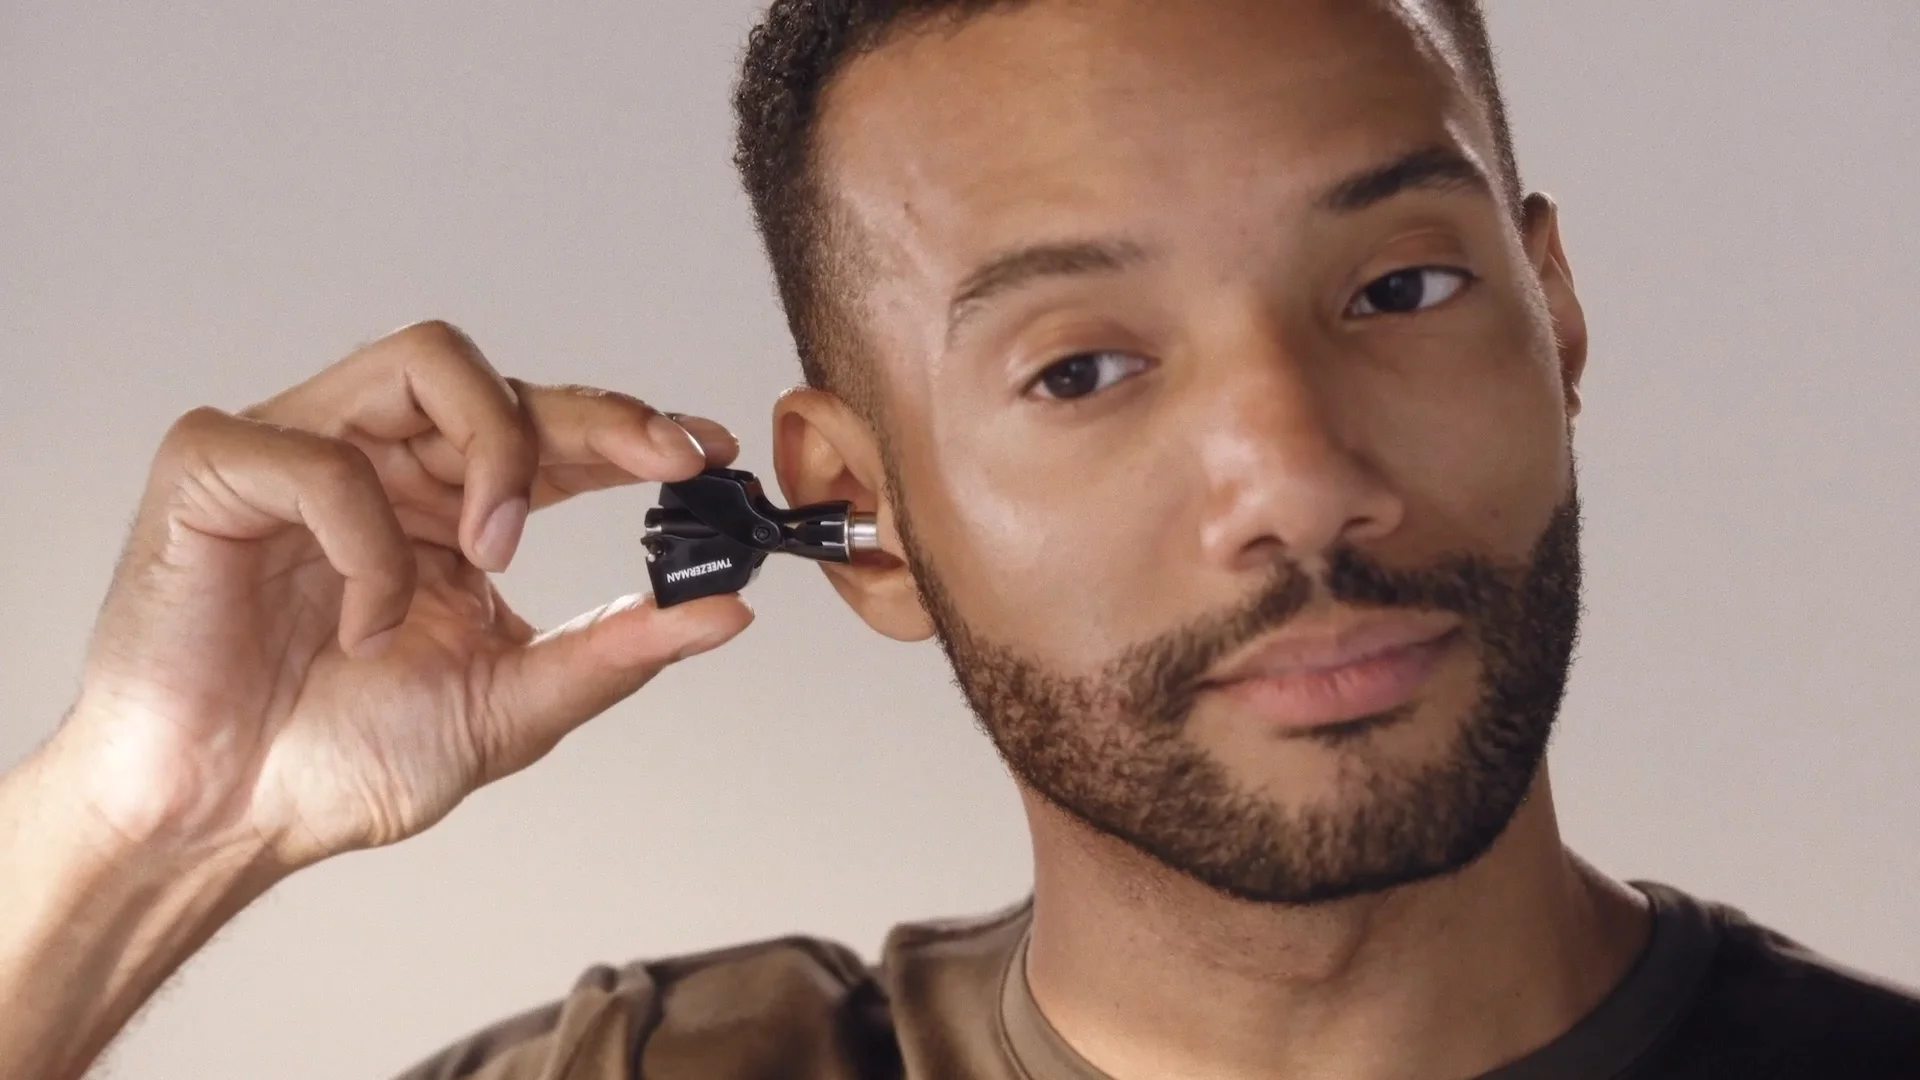 Deluxe Nose & Trimmer How-To Vimeo Ear on Hair